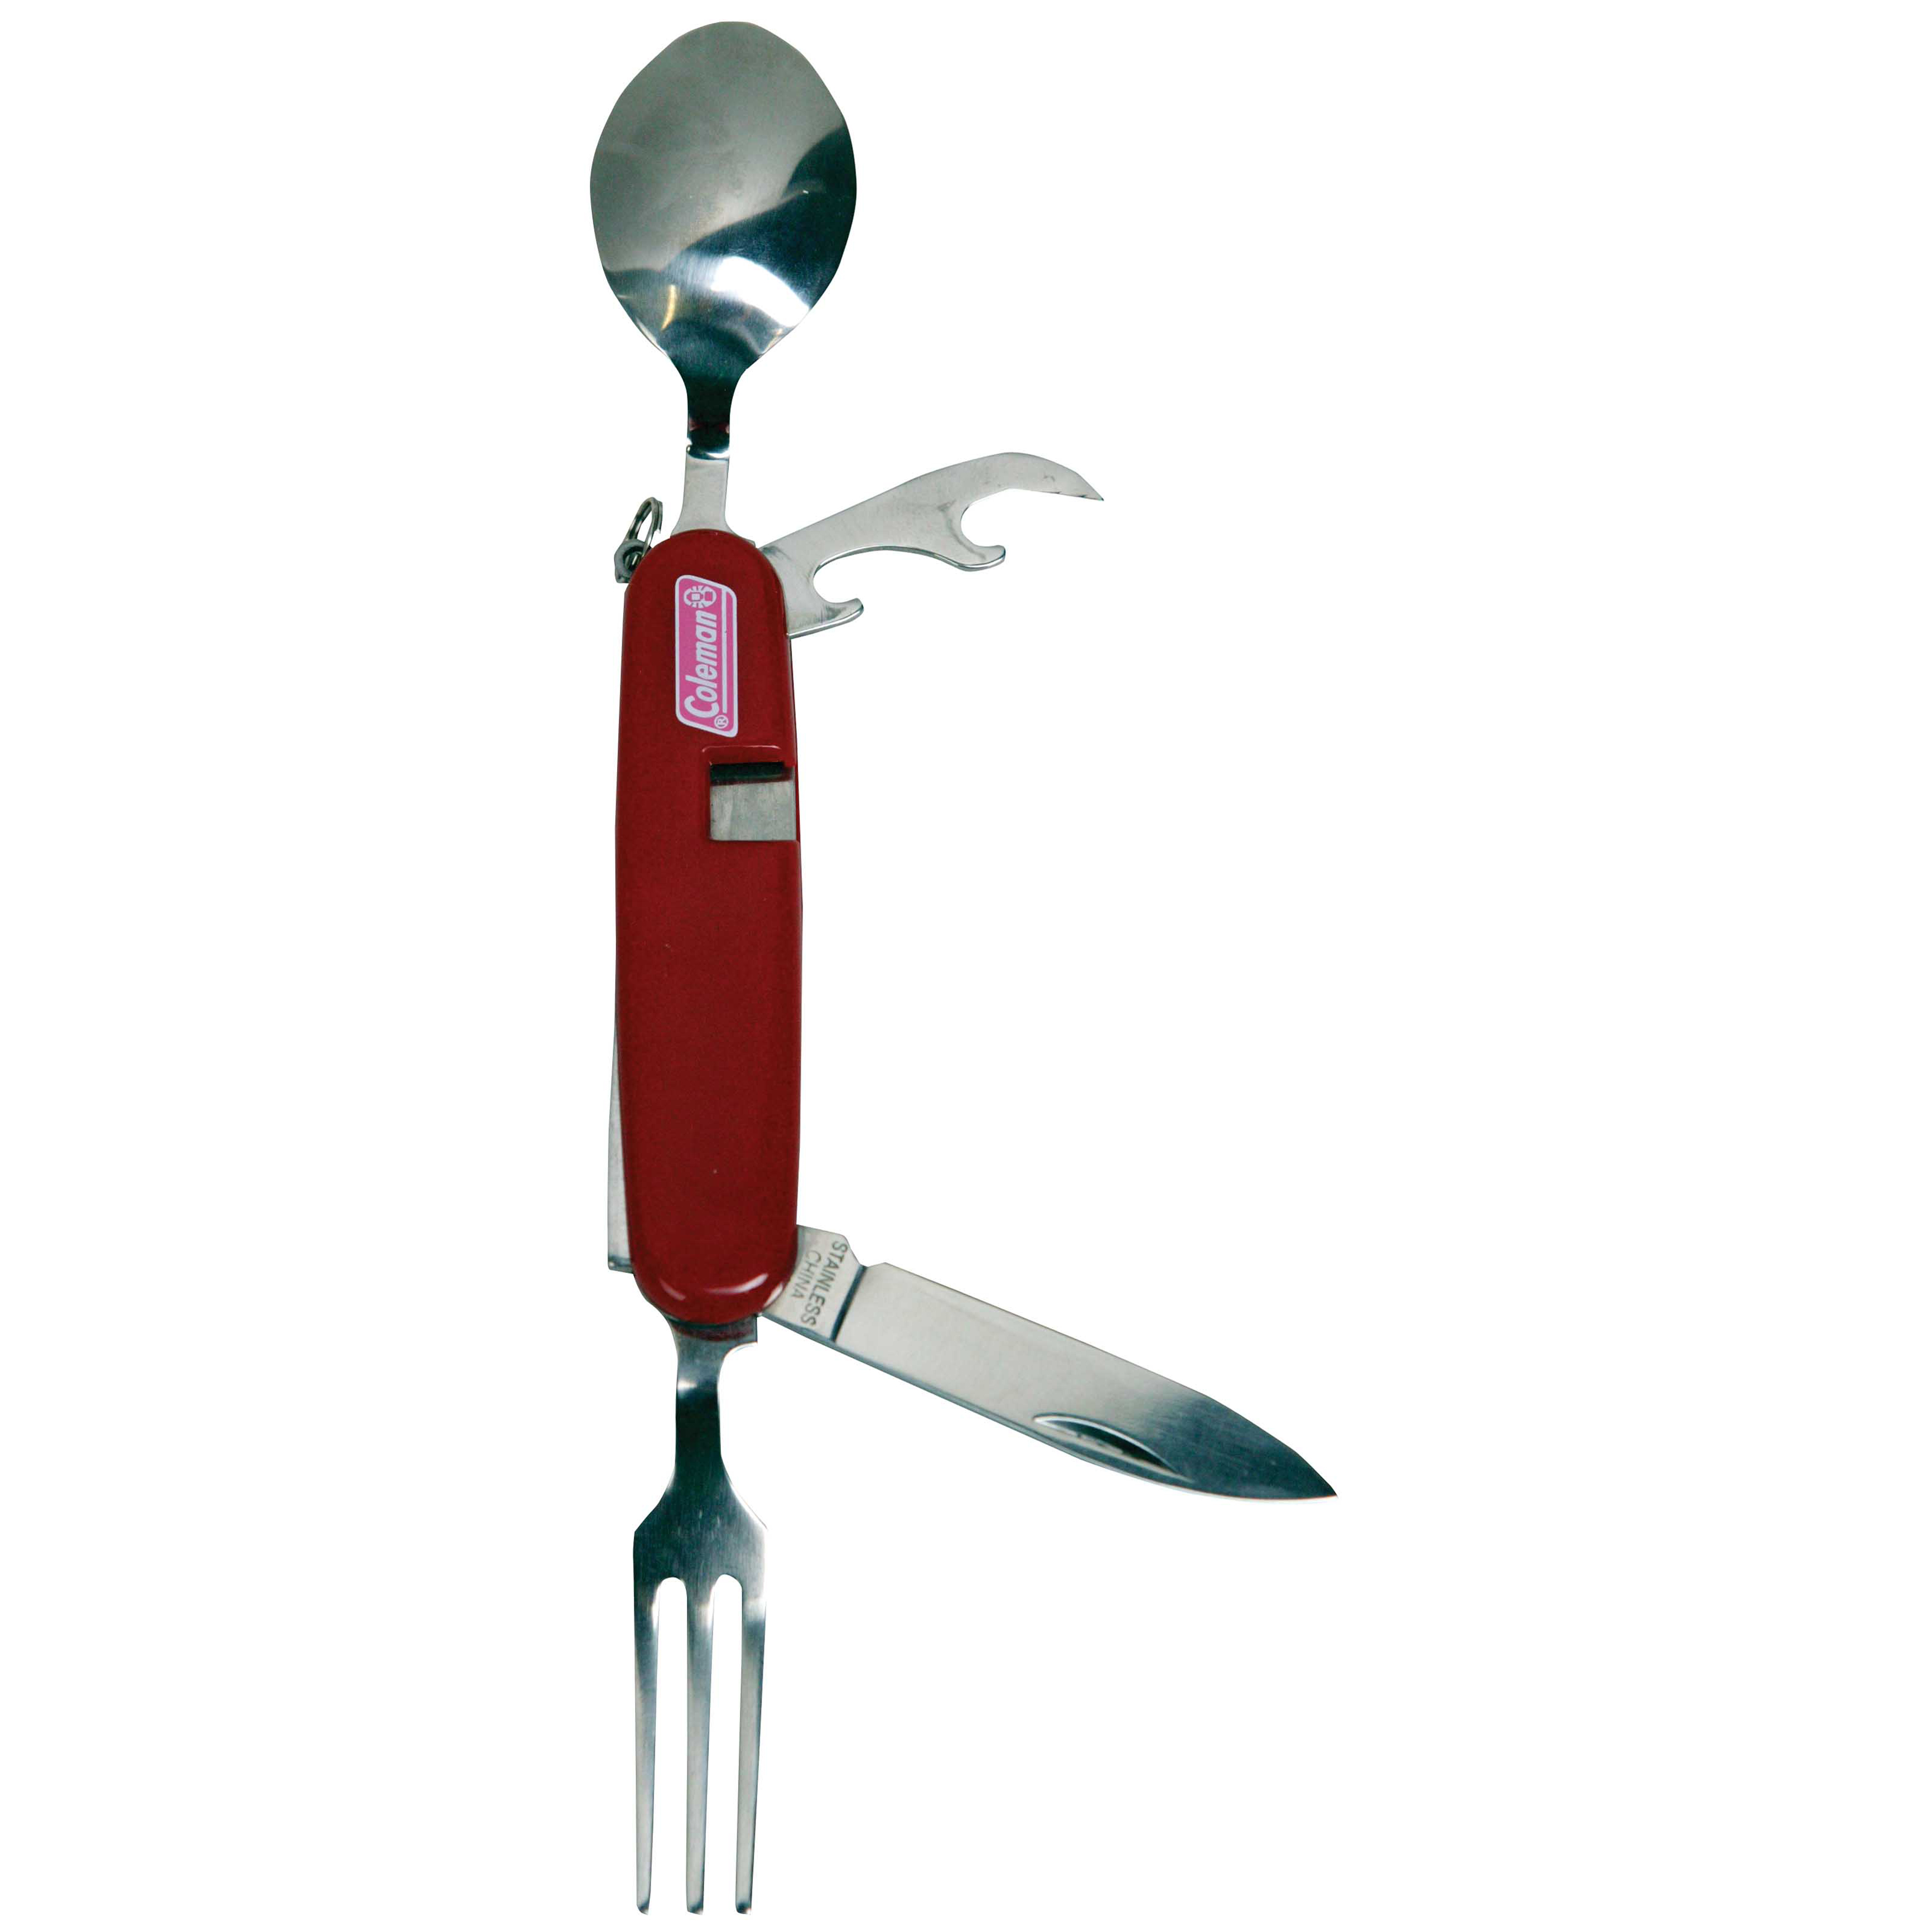 Coleman Camping Utensil Set and Bottle Opener, Stainless Steel - image 1 of 2